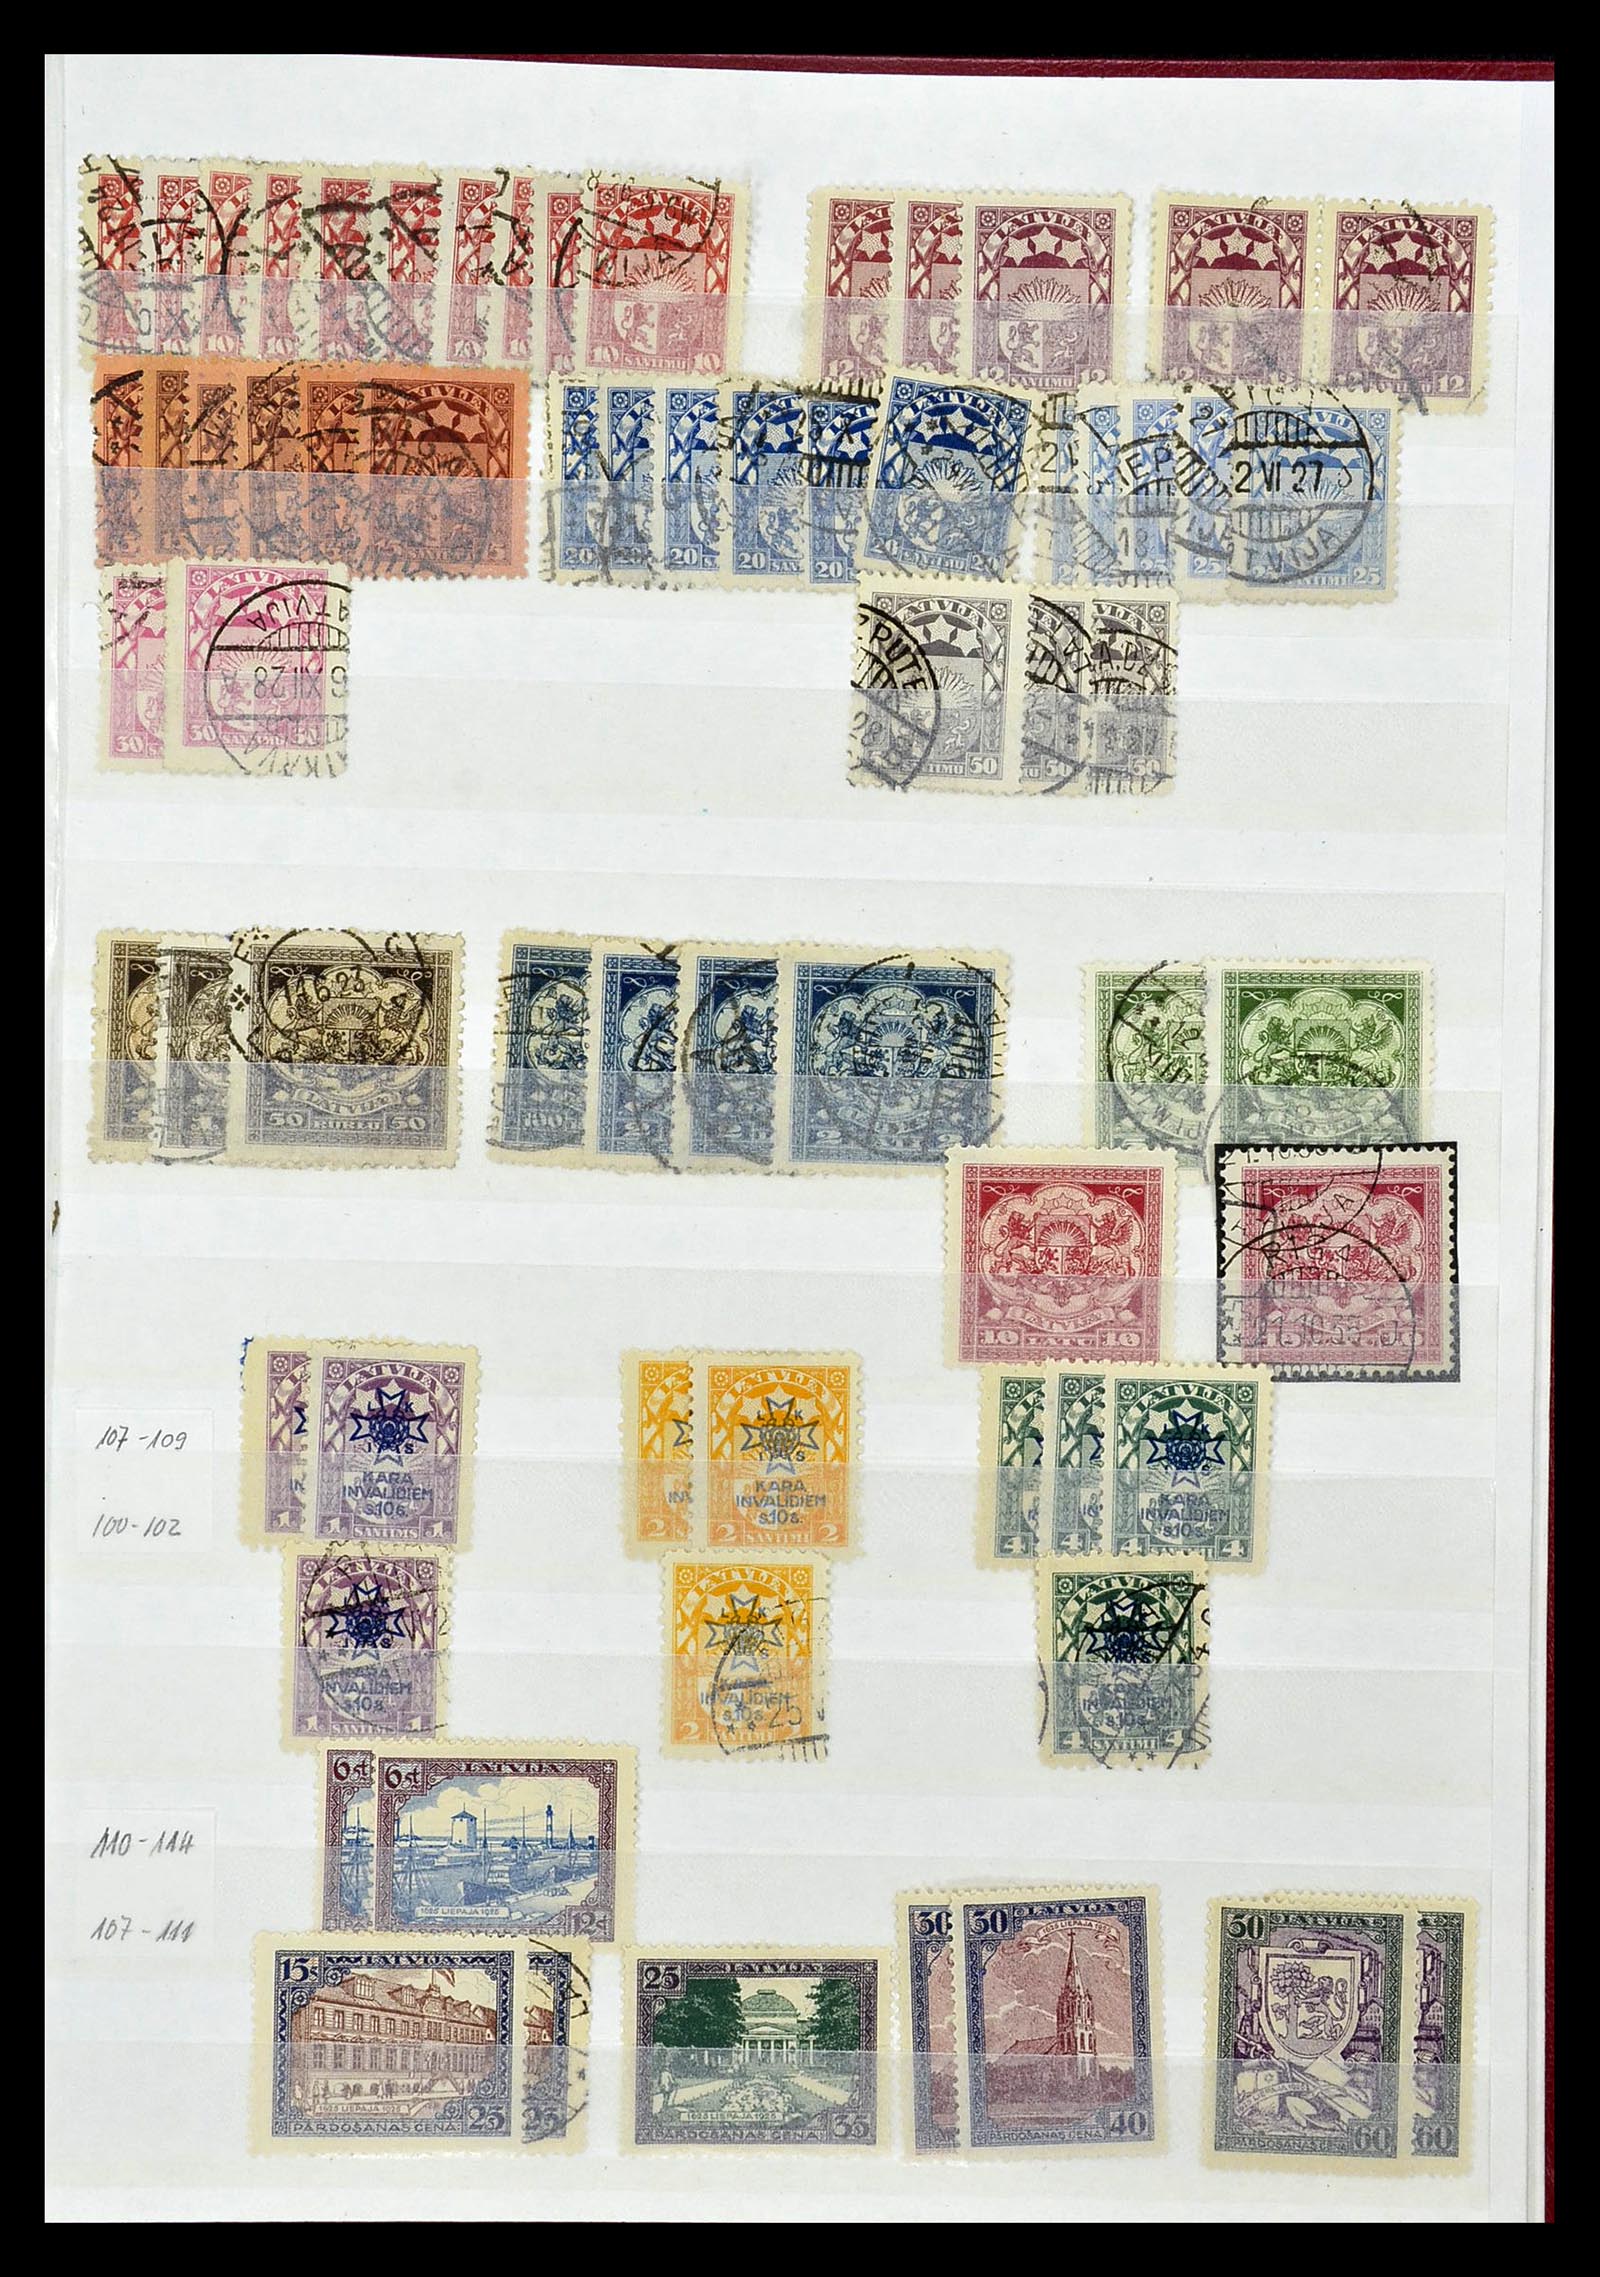 34203 079 - Stamp collection 34203 Europe new issues to 2010.